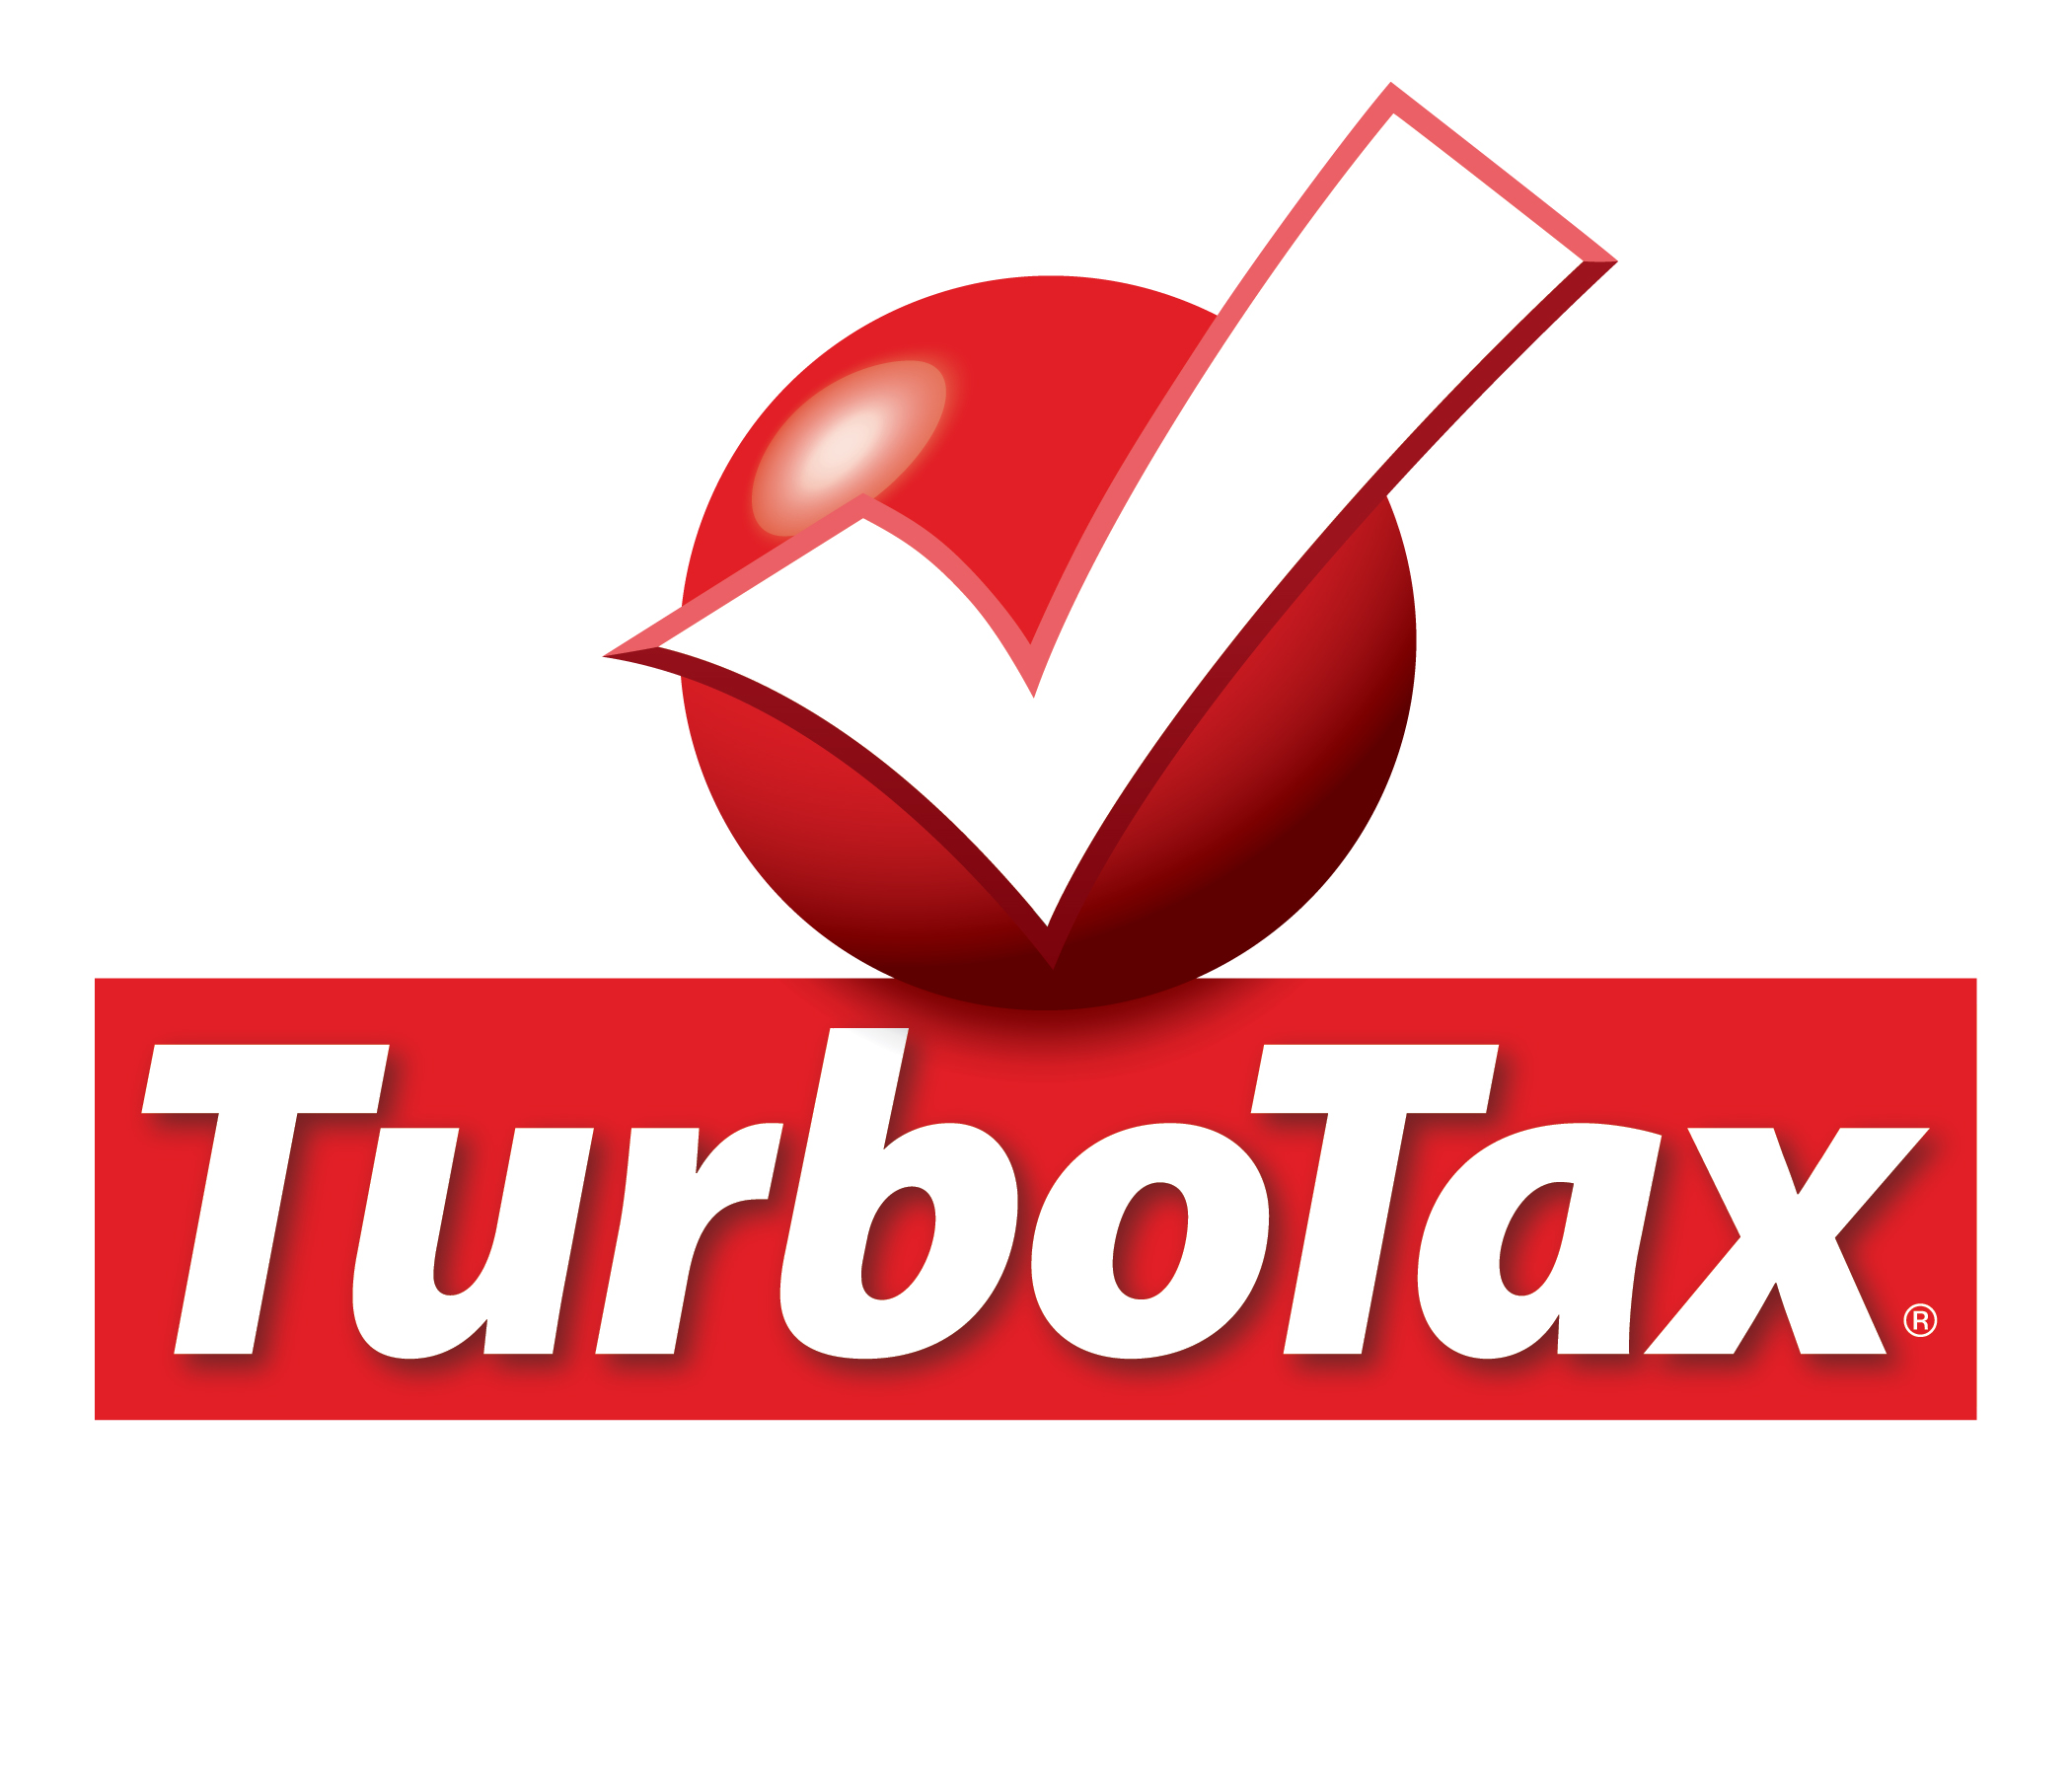 How to Download & Install TurboTax at